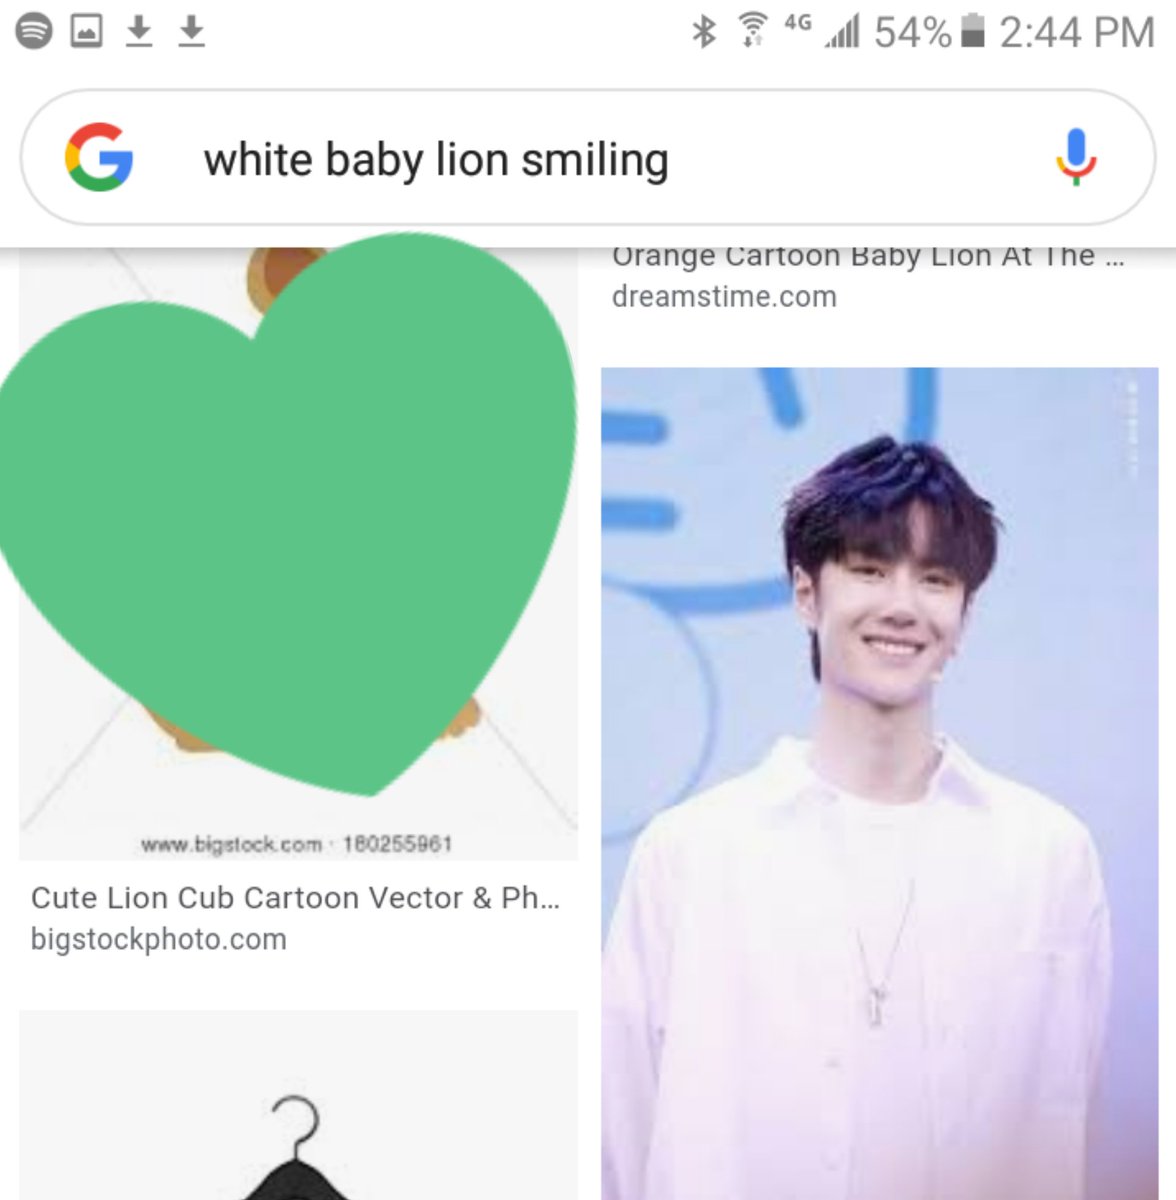 -end of thread- Yiboie baby lion, confirmed by Google 